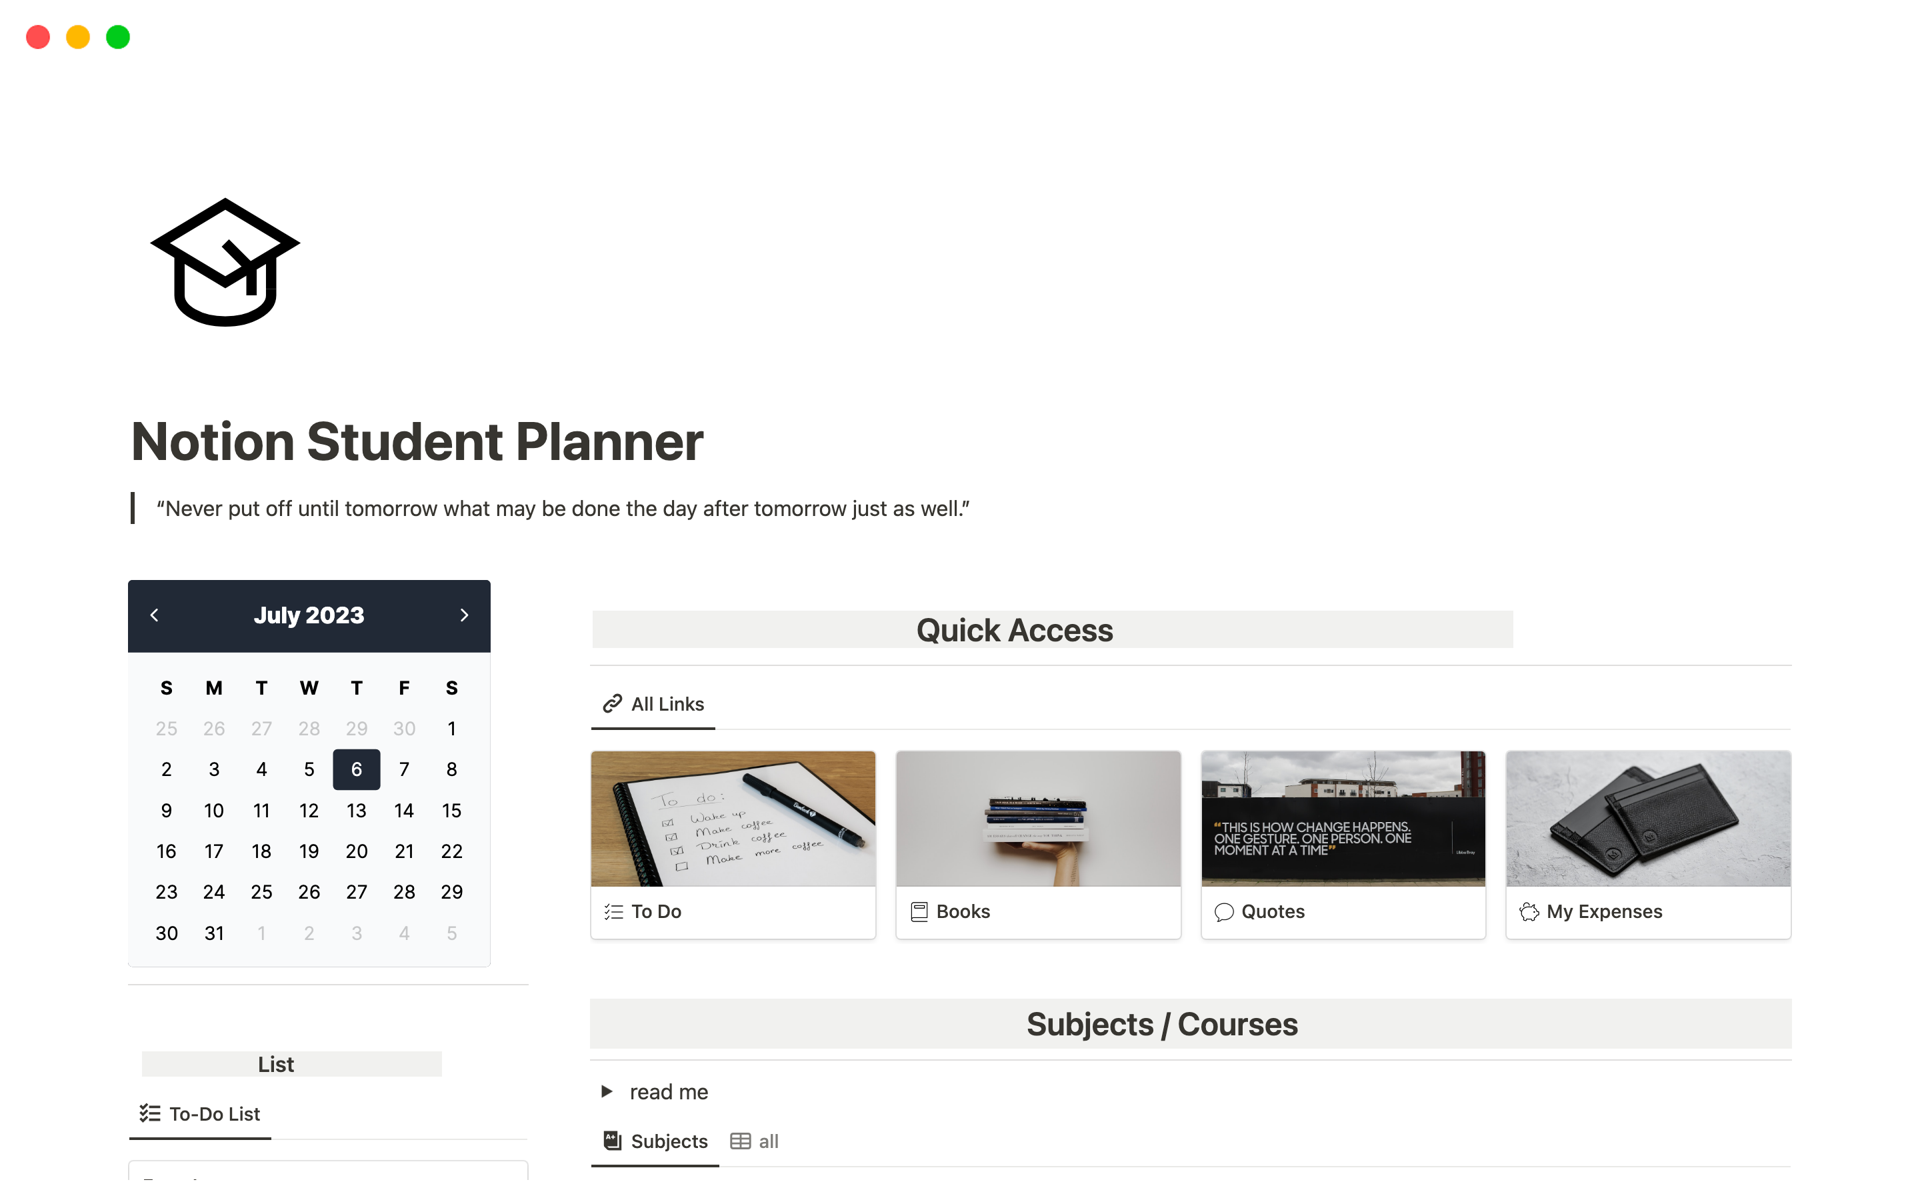 This template and its central dashboard allow for planning, organizing, and tracking school activities, including class notes, daily to-dos, and updates on exams, homework, assignments, and tests.